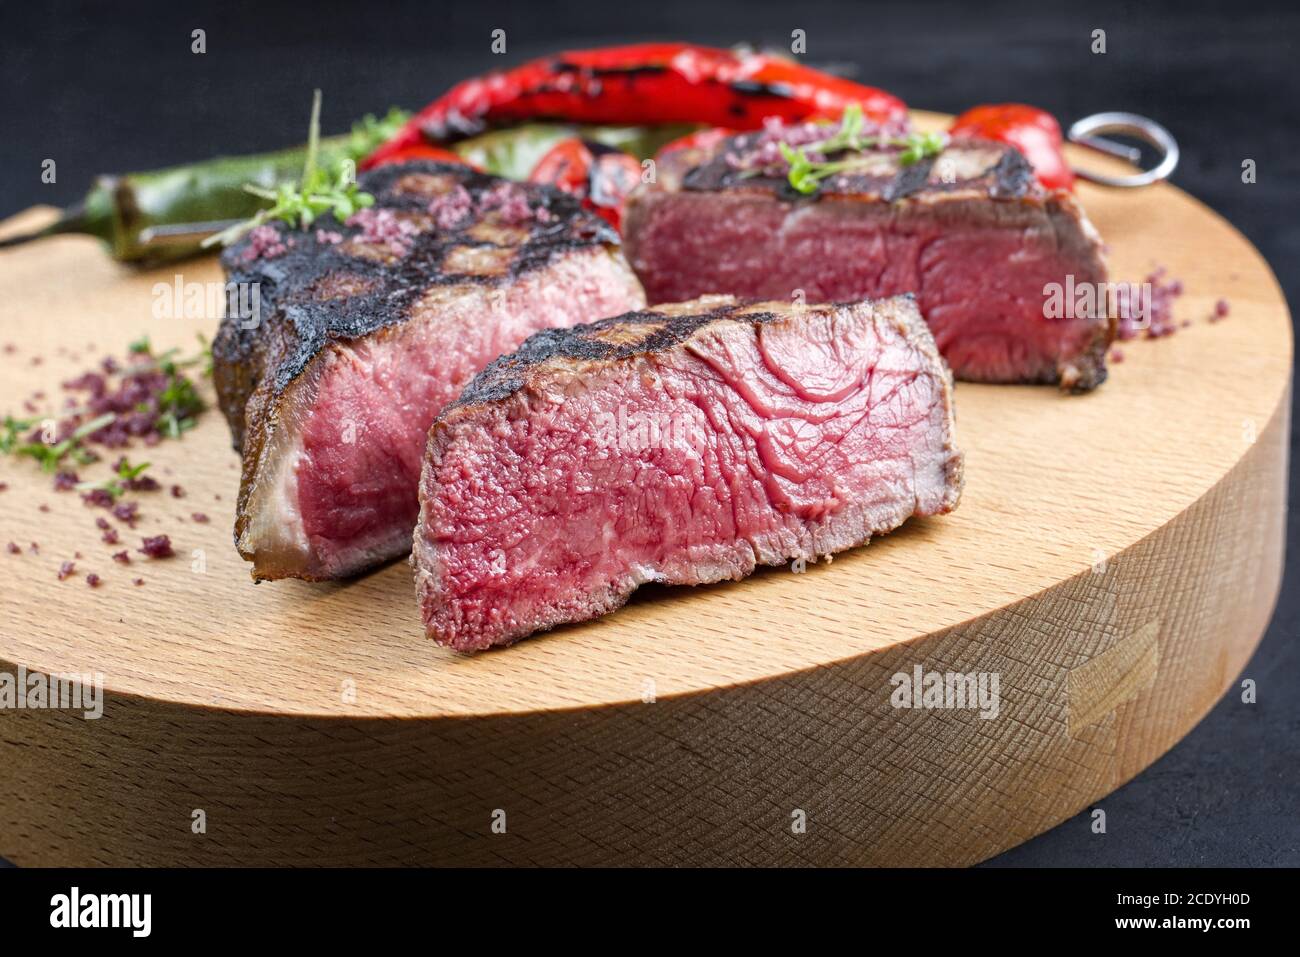 Barbecue dry aged wagyu roast beef steak with tomatoes and chili as closeup on a modern design wooden board Stock Photo